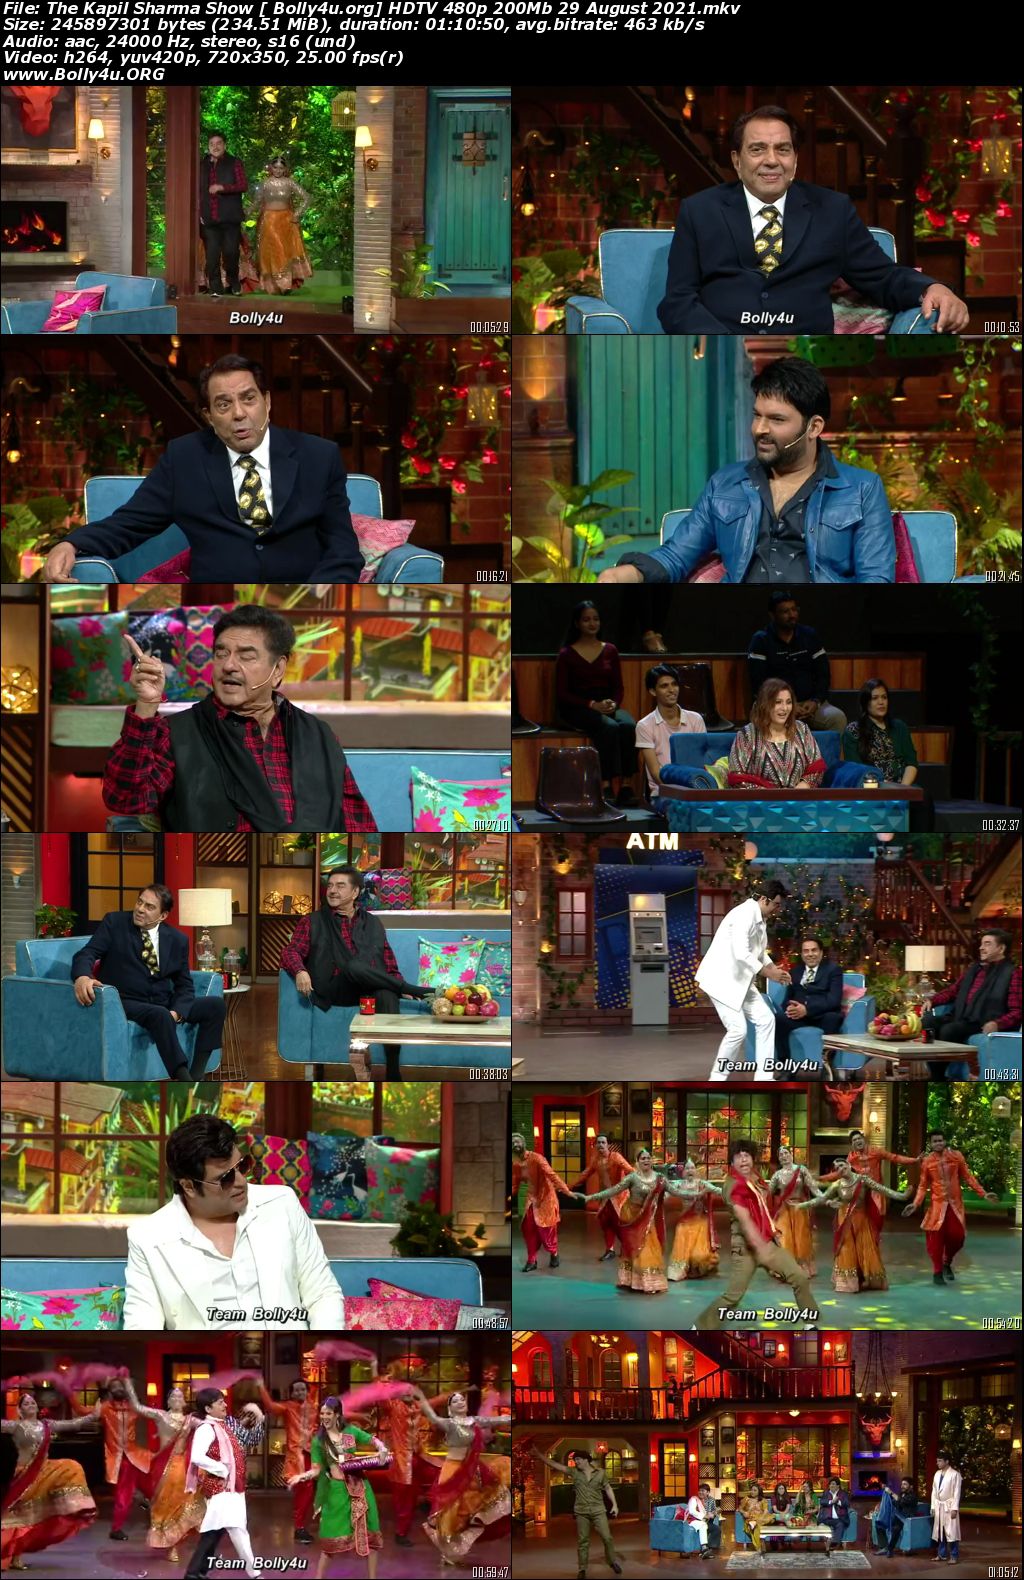 The Kapil Sharma Show HDTV 480p 200MB 29 August 2021 Download